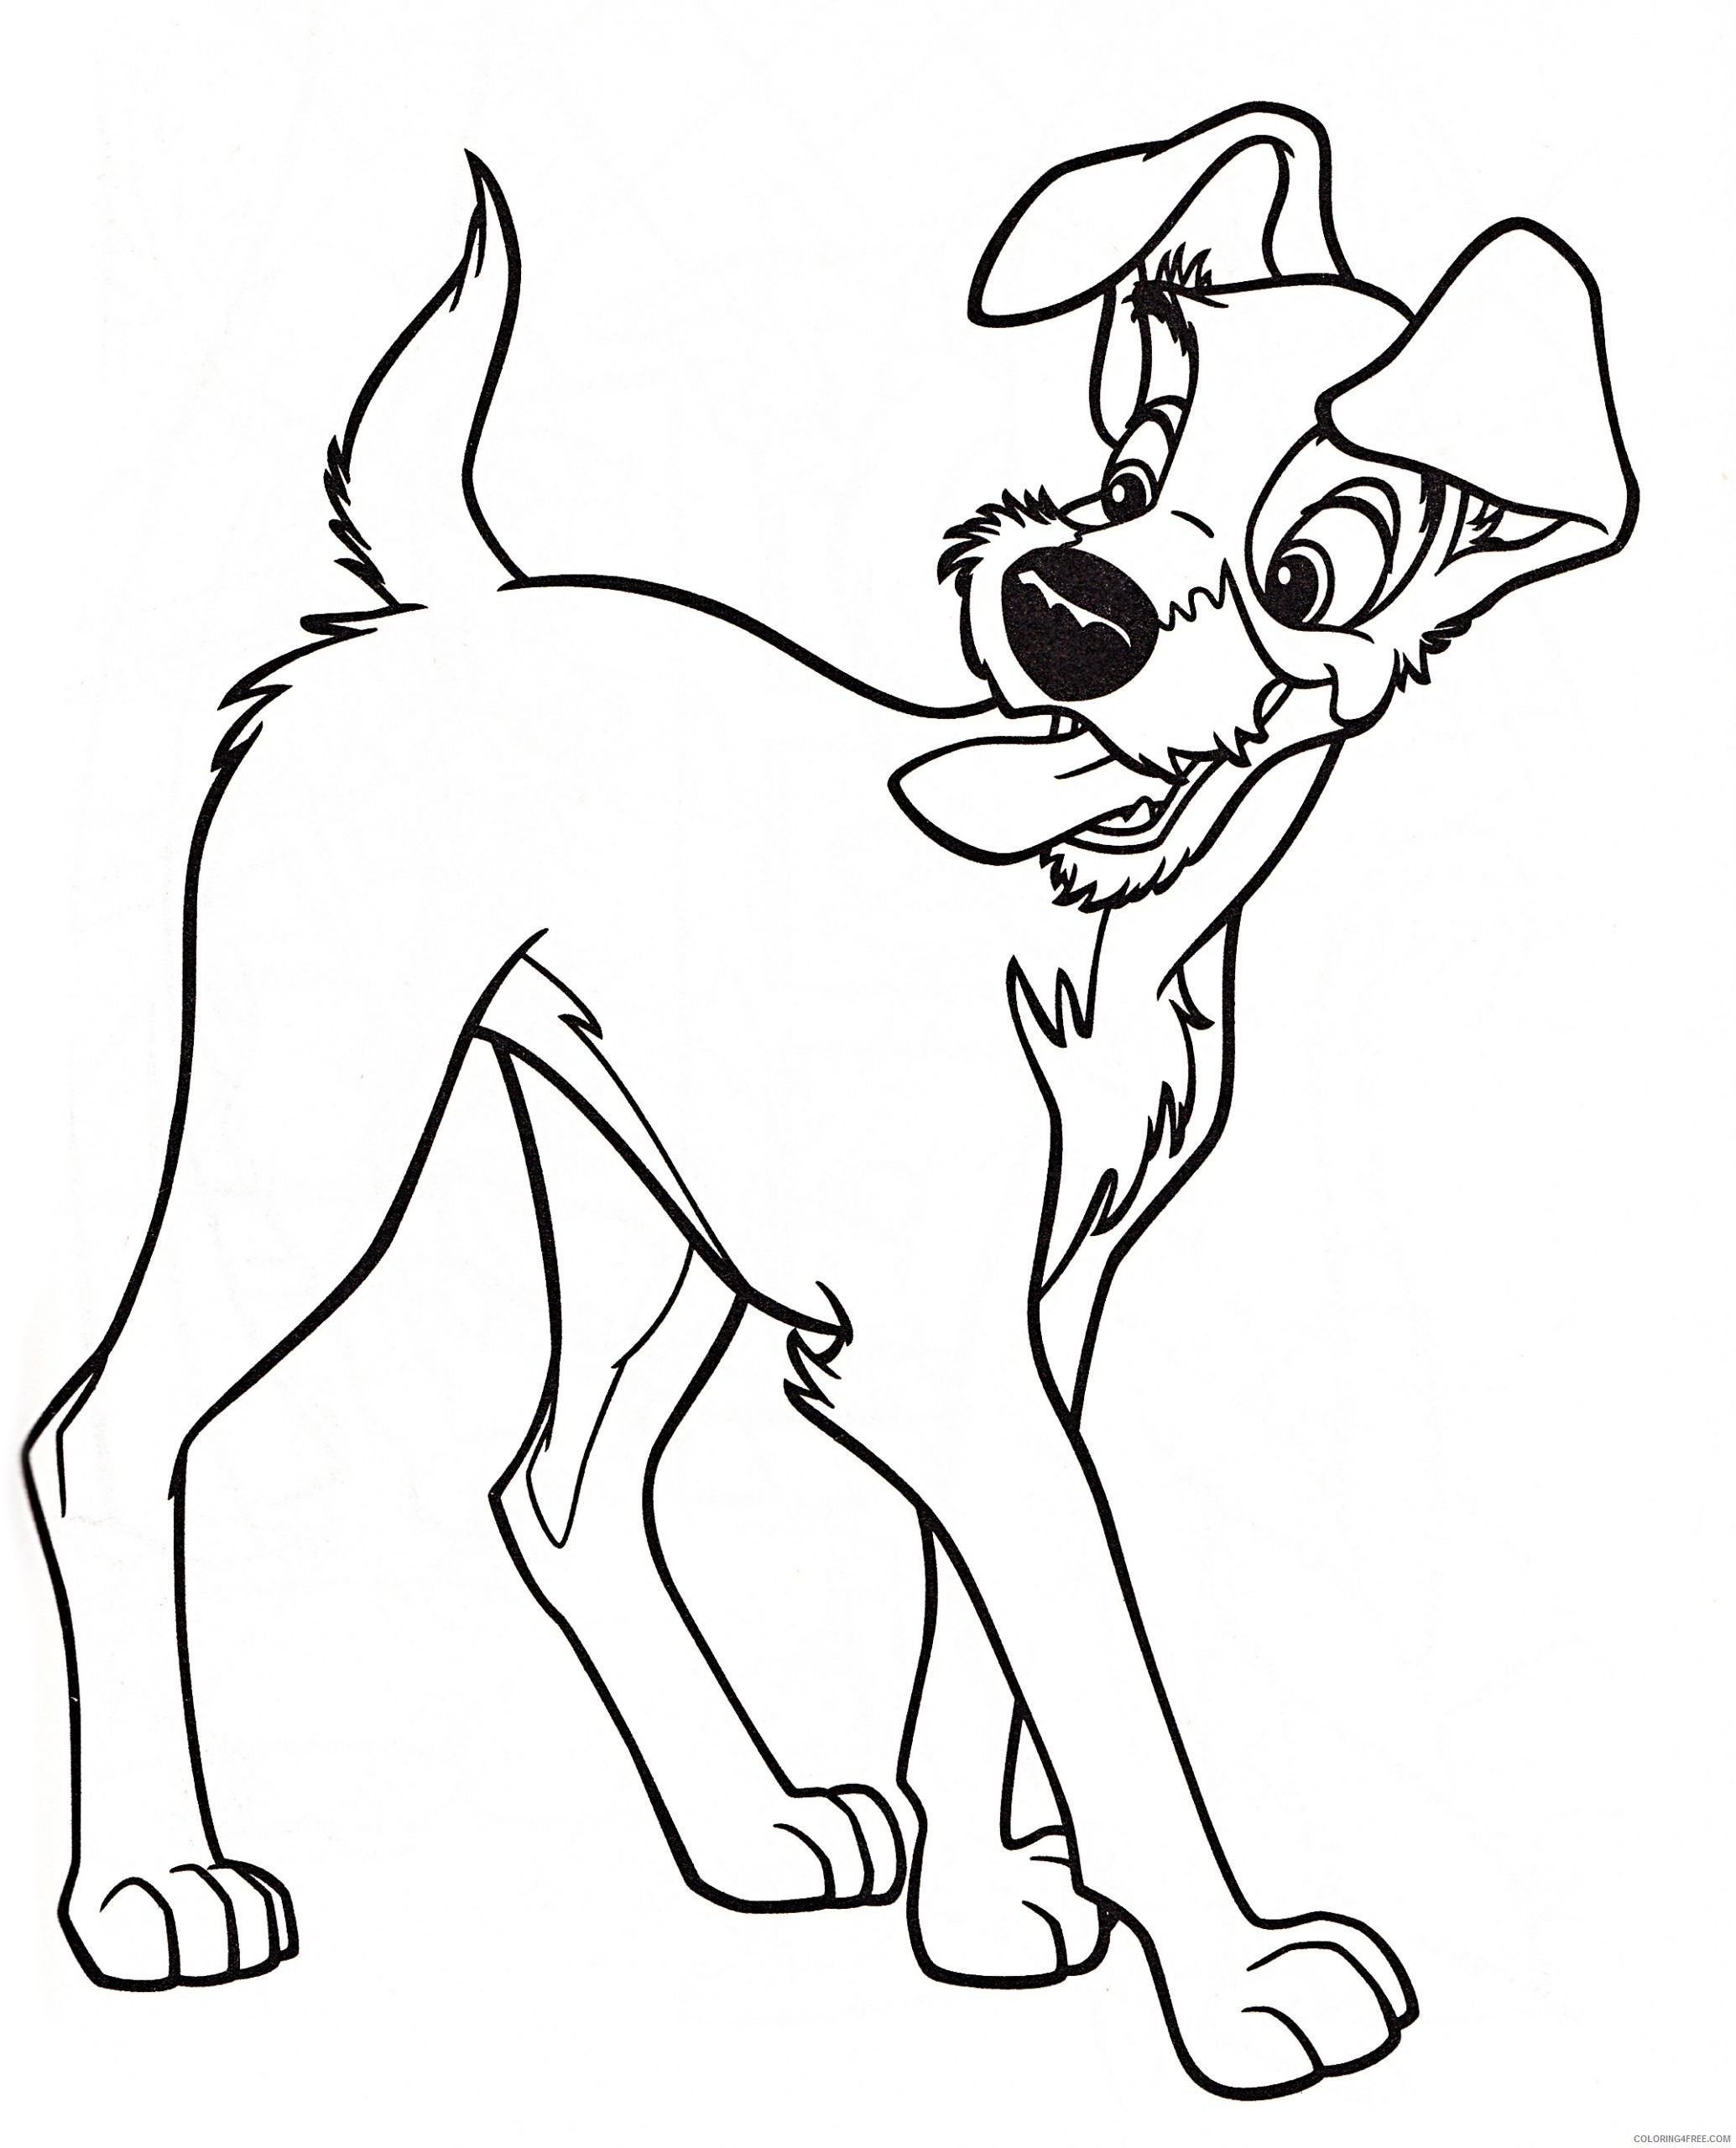 Lady and the Tramp Coloring Pages Cartoons Tramp scaled Printable 2020 3618 Coloring4free